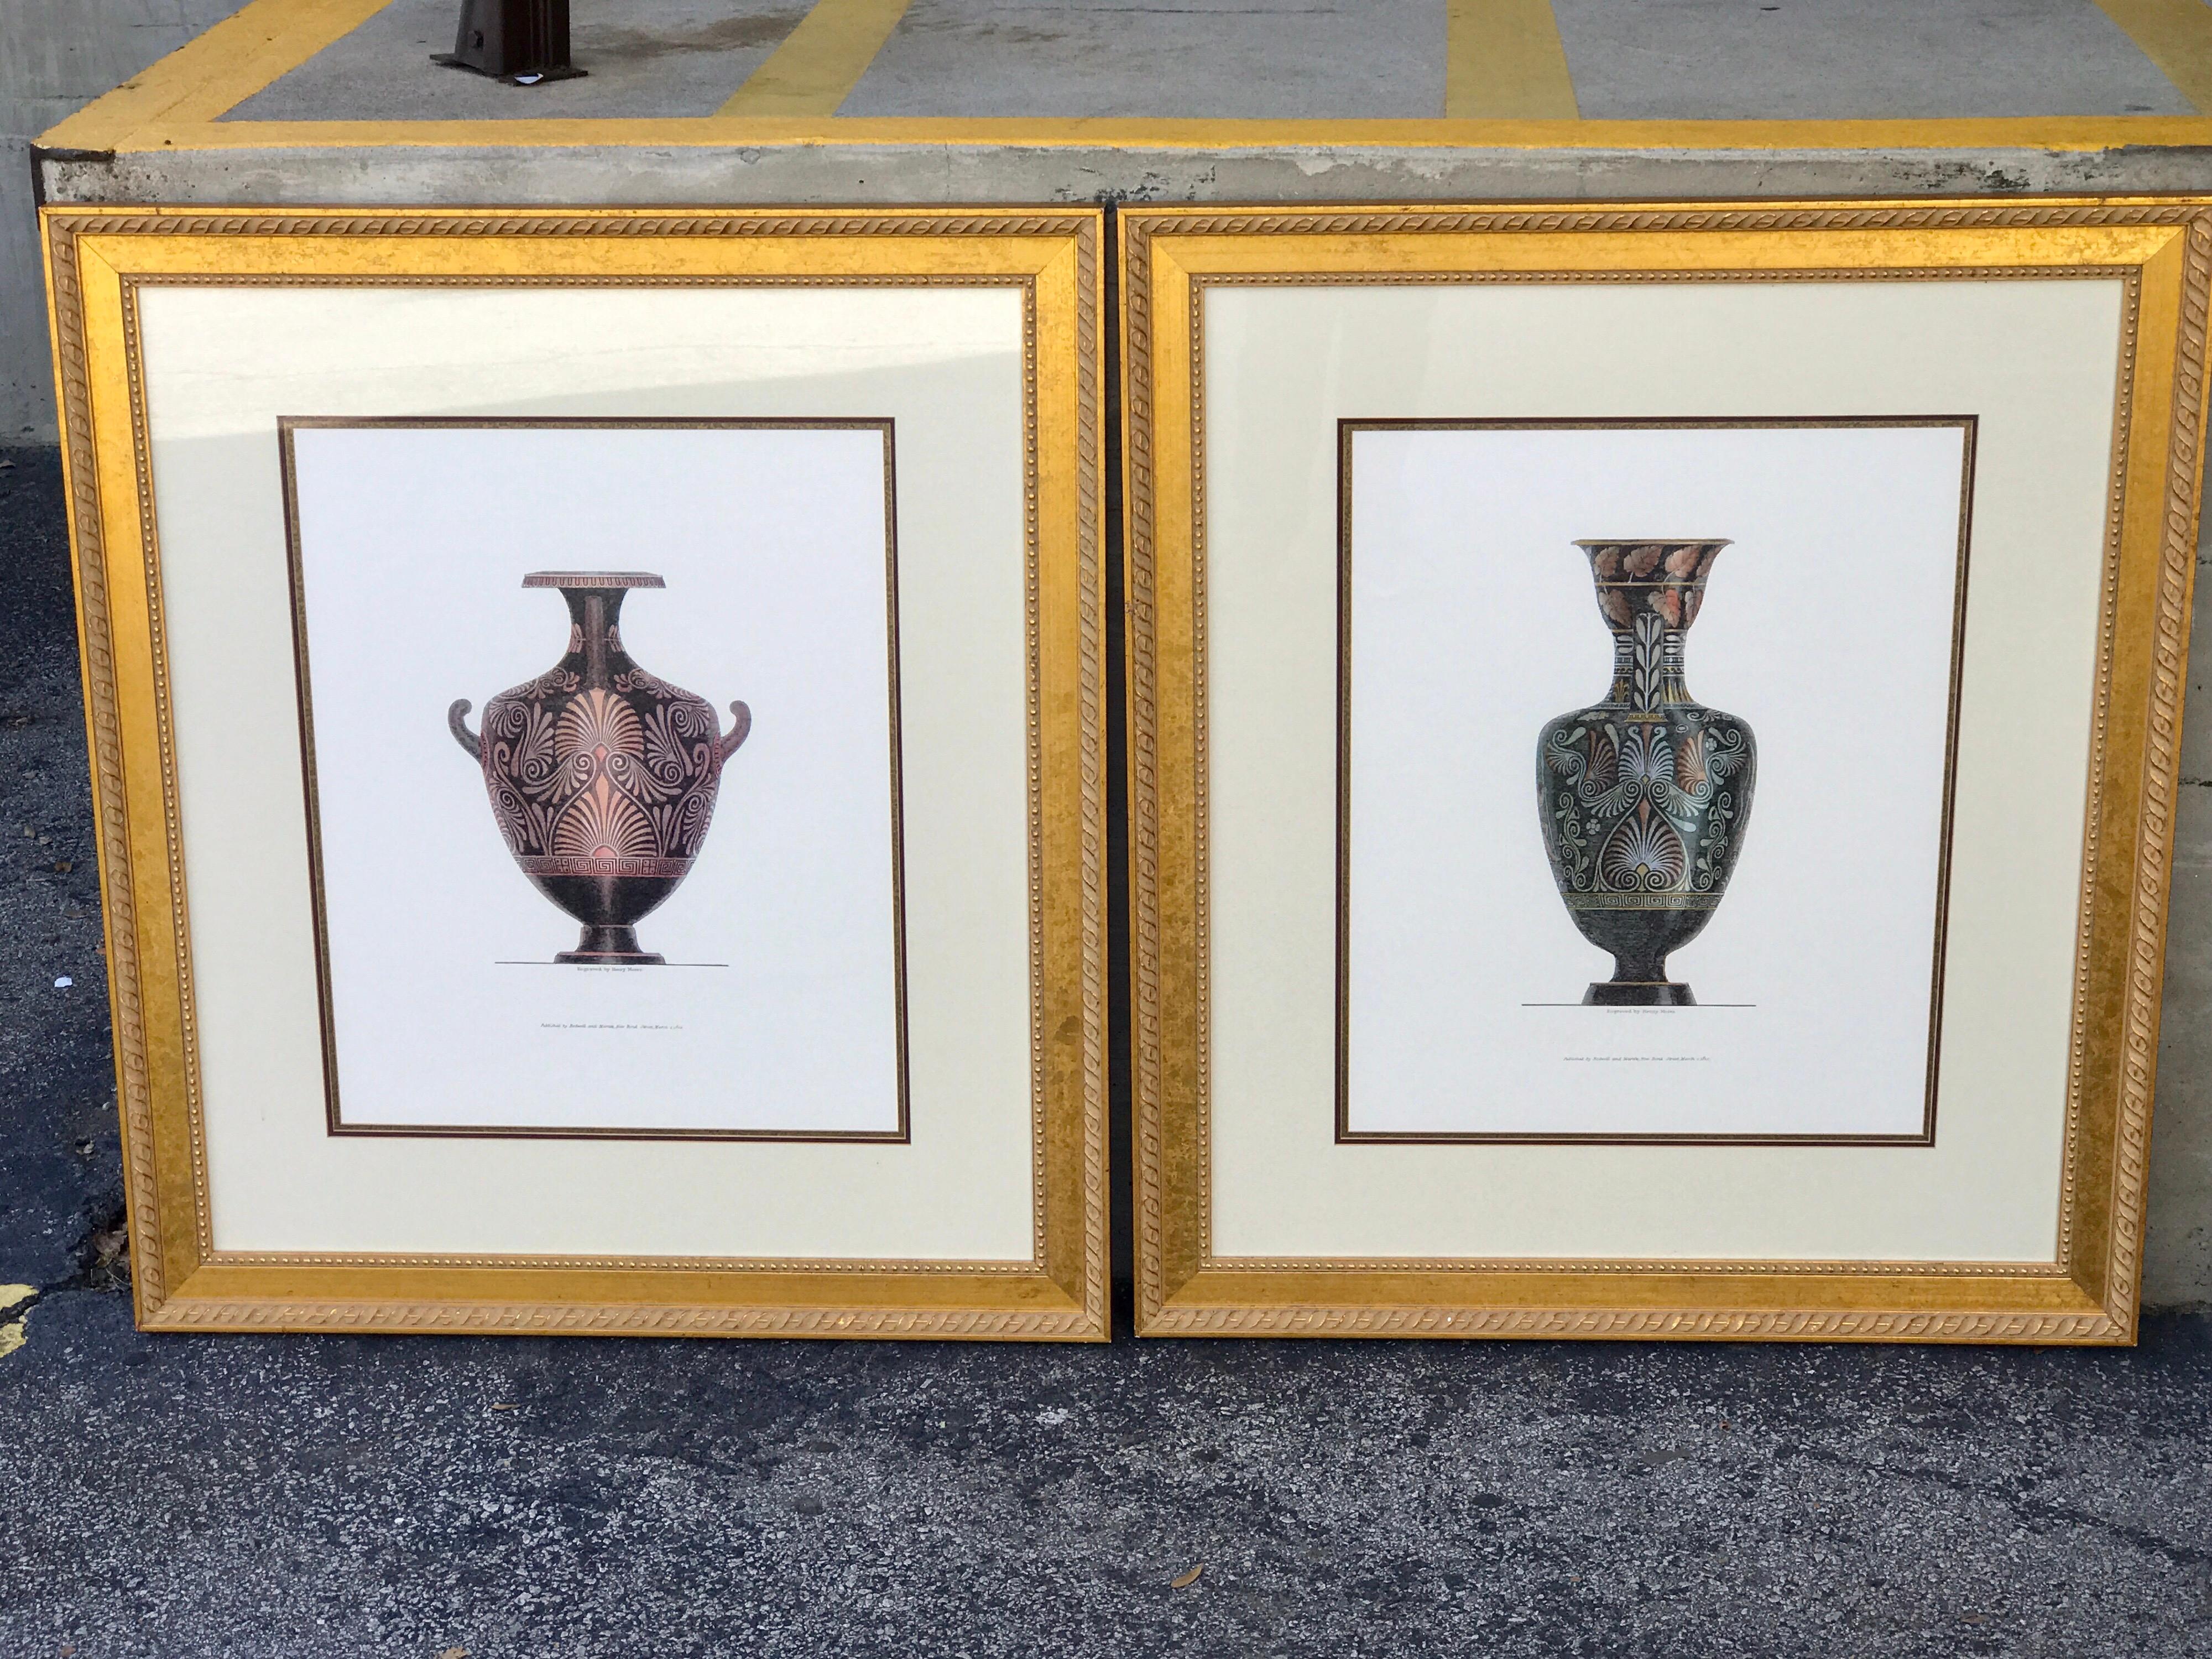 Pair of large scale Neoclassical Etruscan urn prints, 20th century prints, Each one after Henry Moses (British, b. ca. 1782–1870) Custom framed and matted. Fresh from a Palm Beach estate.
Image 24